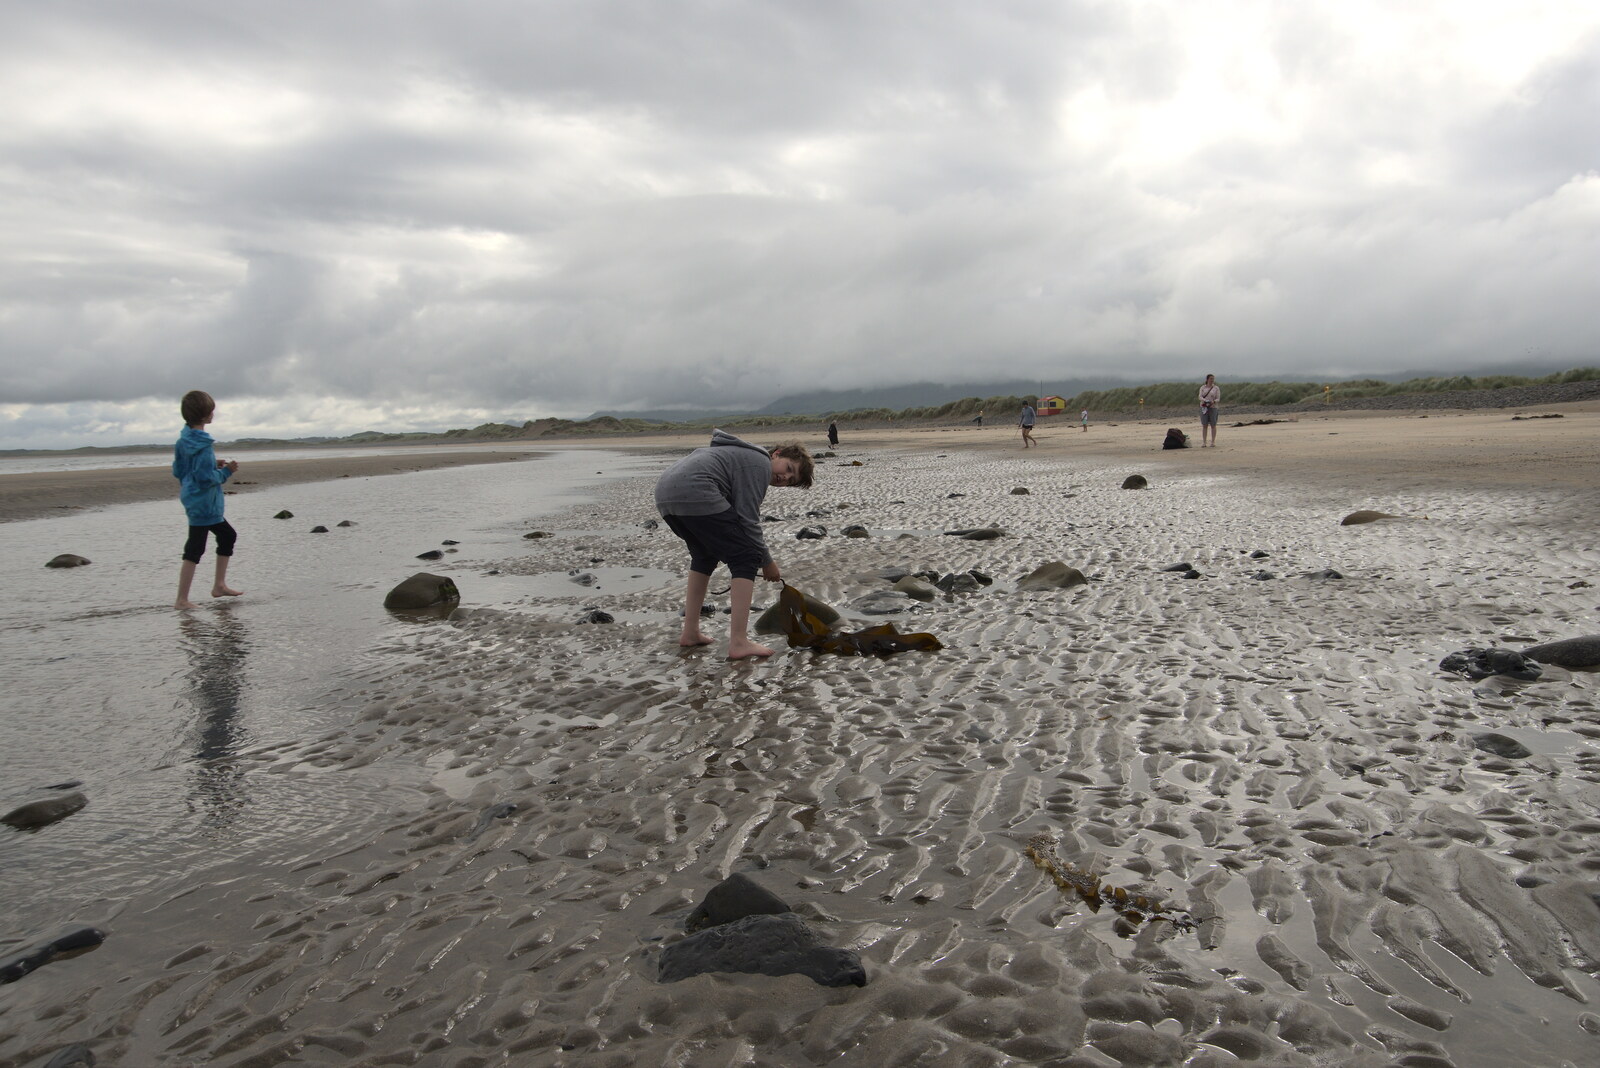 Pints of Guinness and Streedagh Beach, Grange and Sligo, Ireland - 9th August 2021: Fred digs up more seaweed